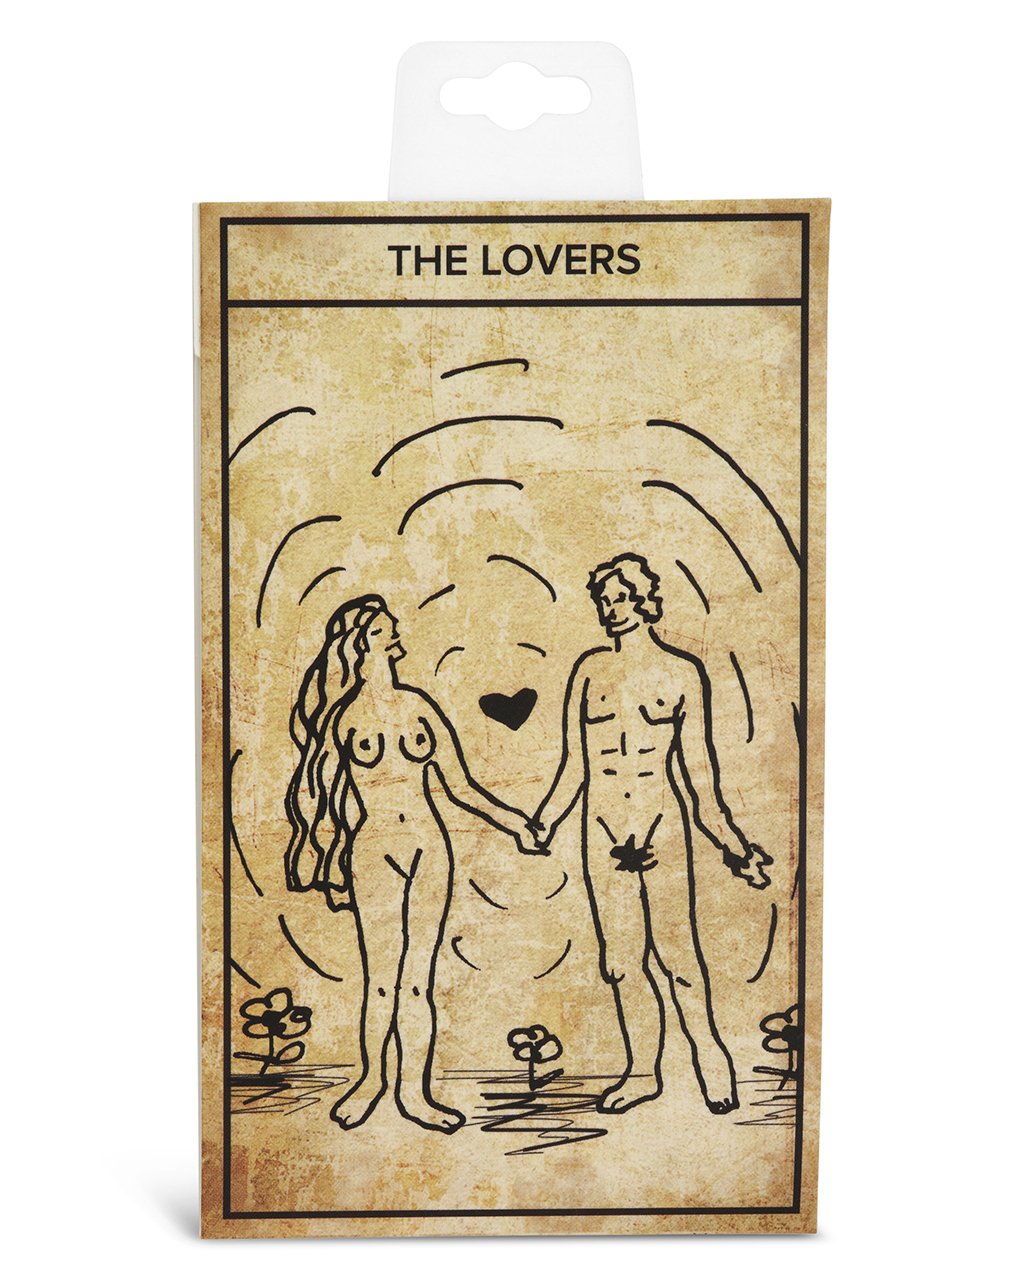 The Lovers Tarot Card Necklace - Sterling Forever